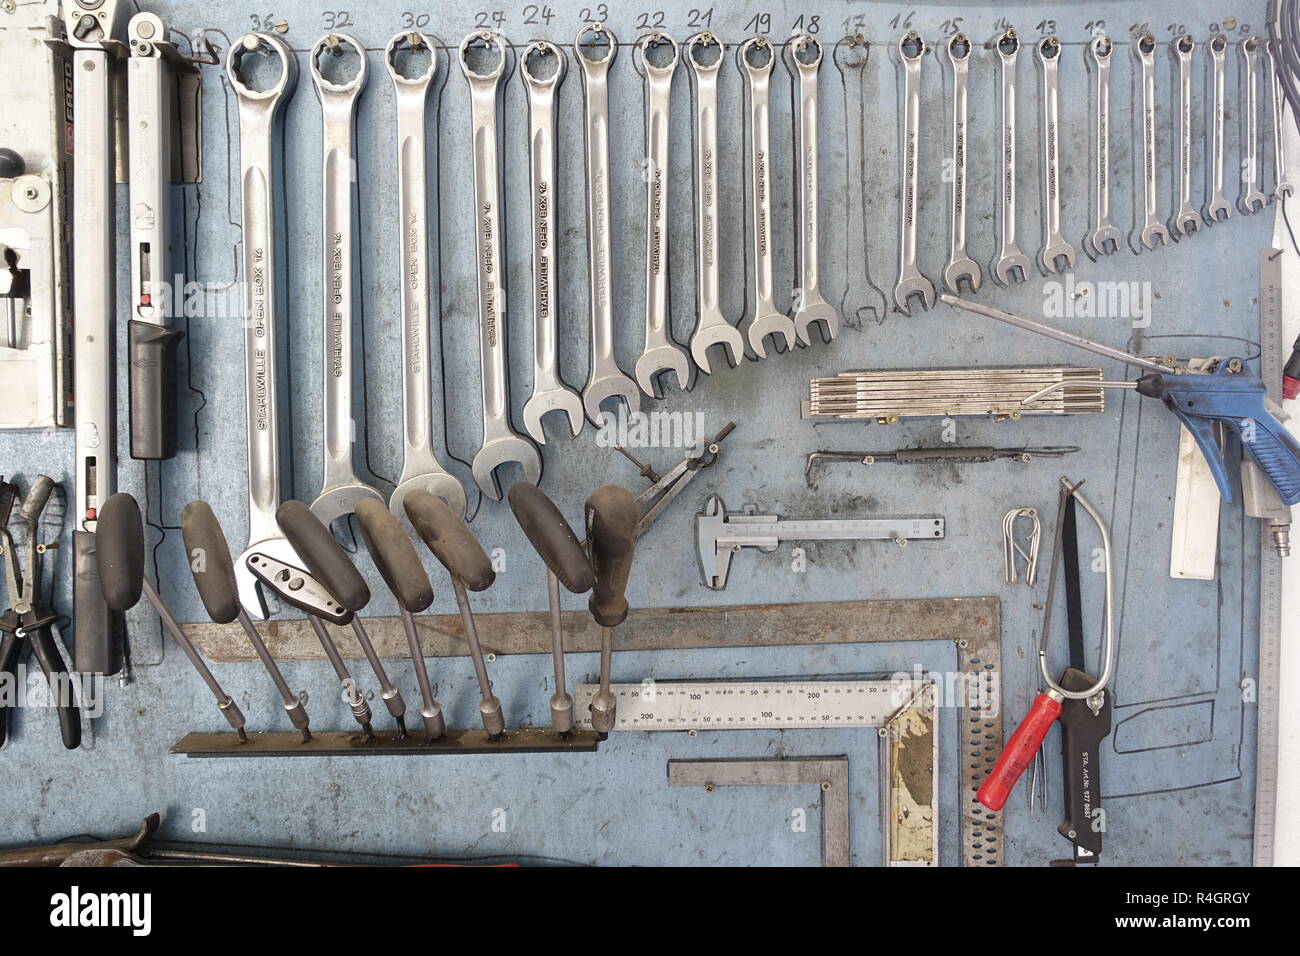 Tools, various wrenches in car repair shop, Germany Stock Photo